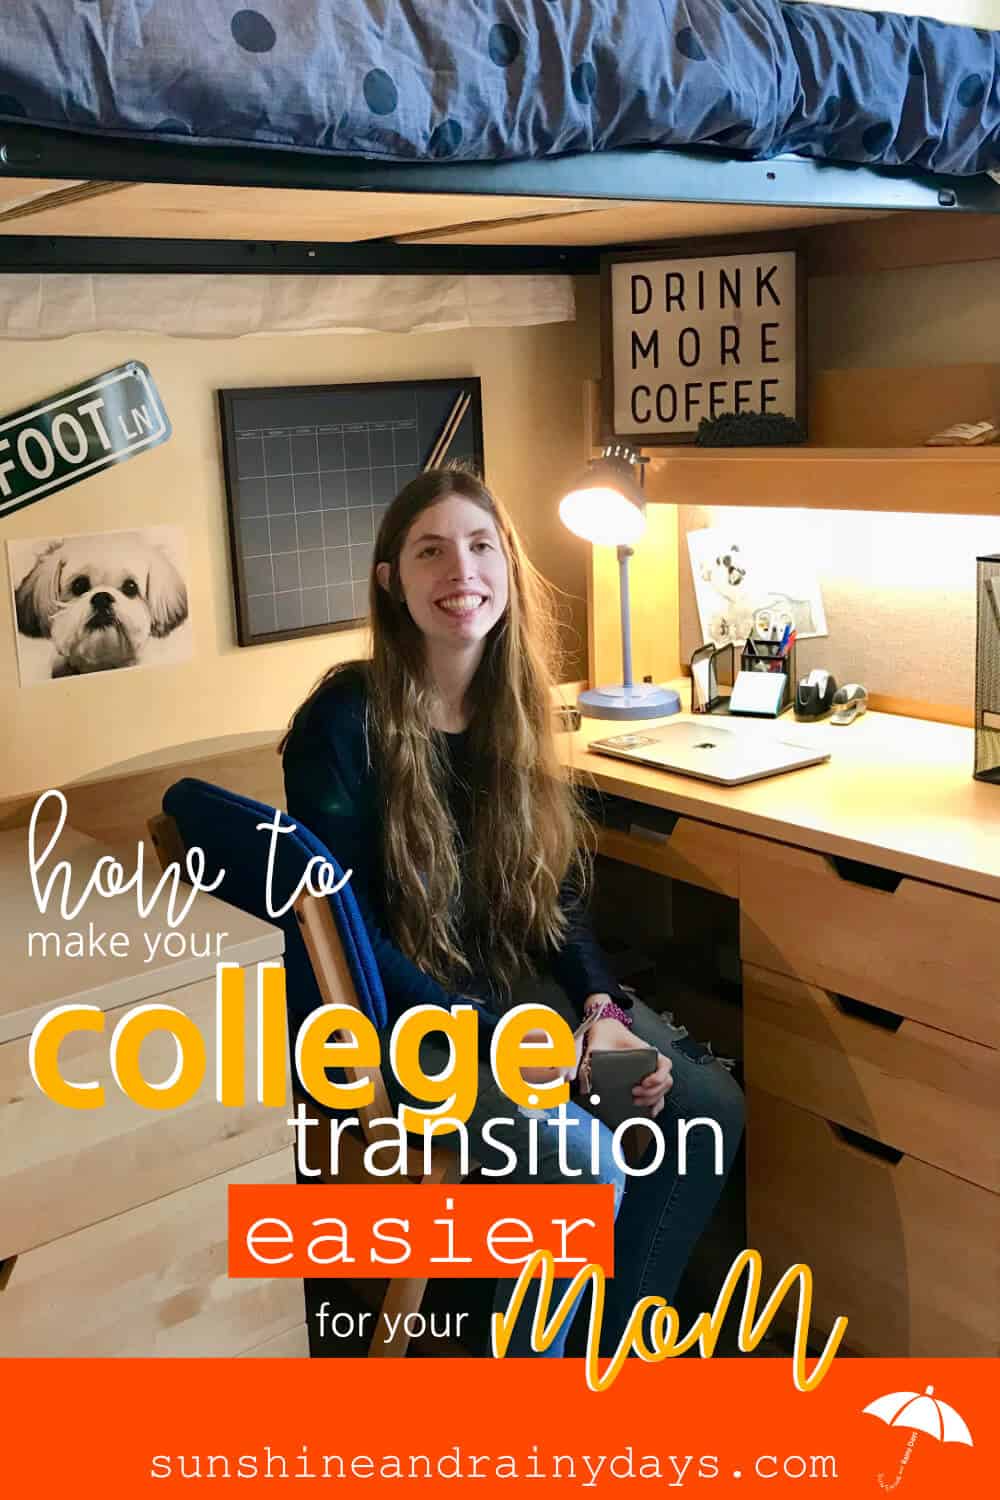 We parents work hard to make the college transition easier on our kids. Then the day comes when we drive away from campus. That day is hard. College Transition | College Transition Tips | #college #moms #SARD